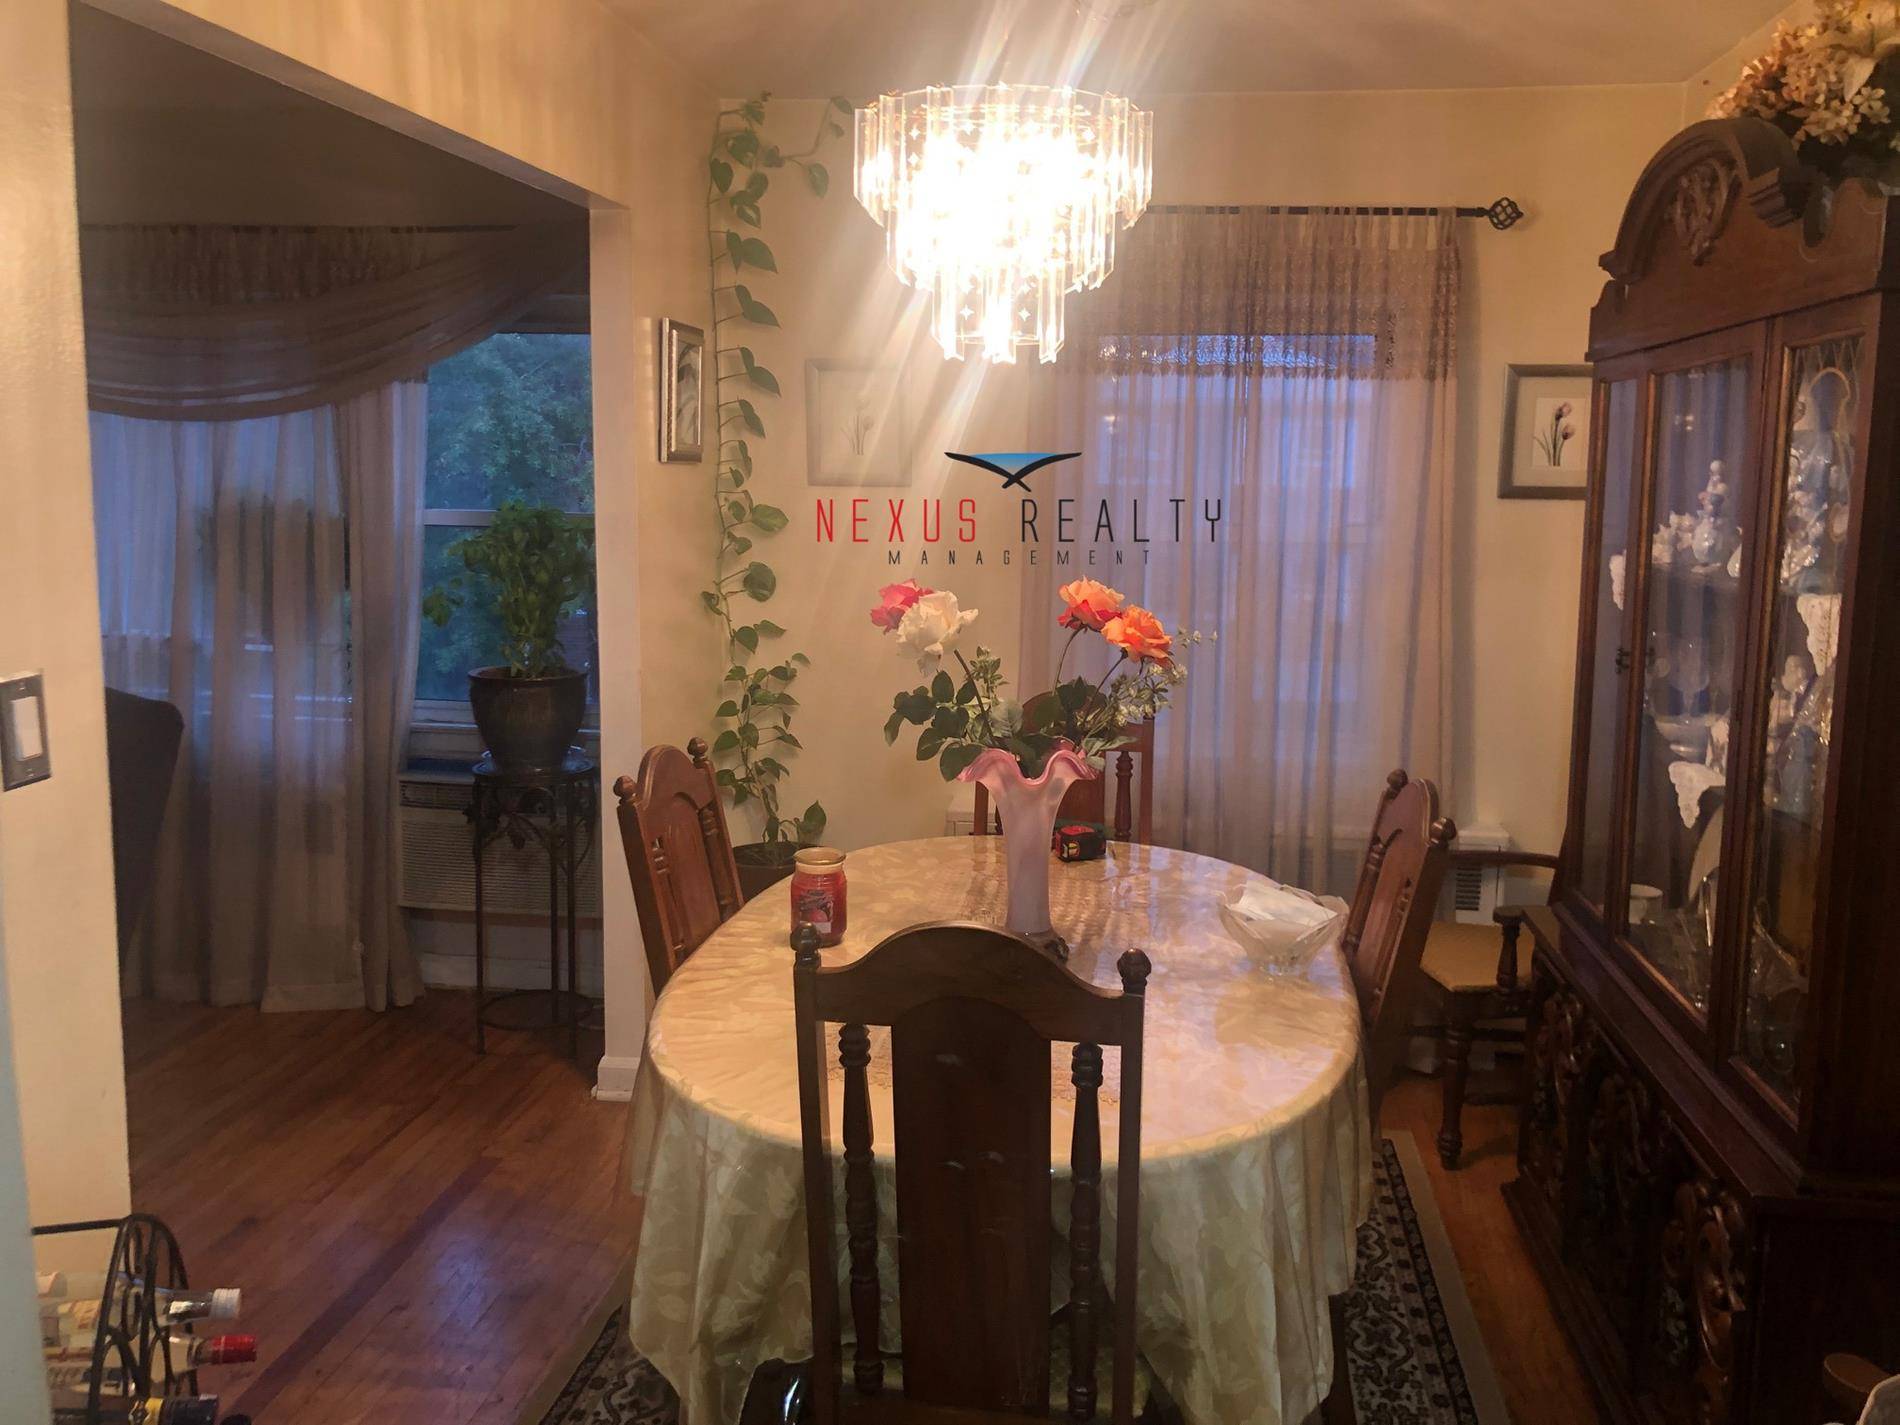 Spacious 3 Bedroom apartment in Woodside ONLY 25003 Queen size bedrooms on the 3rd floor in a 3 family private houseLarge kitchen with great cabinet space, and dining room areaSpacious ...